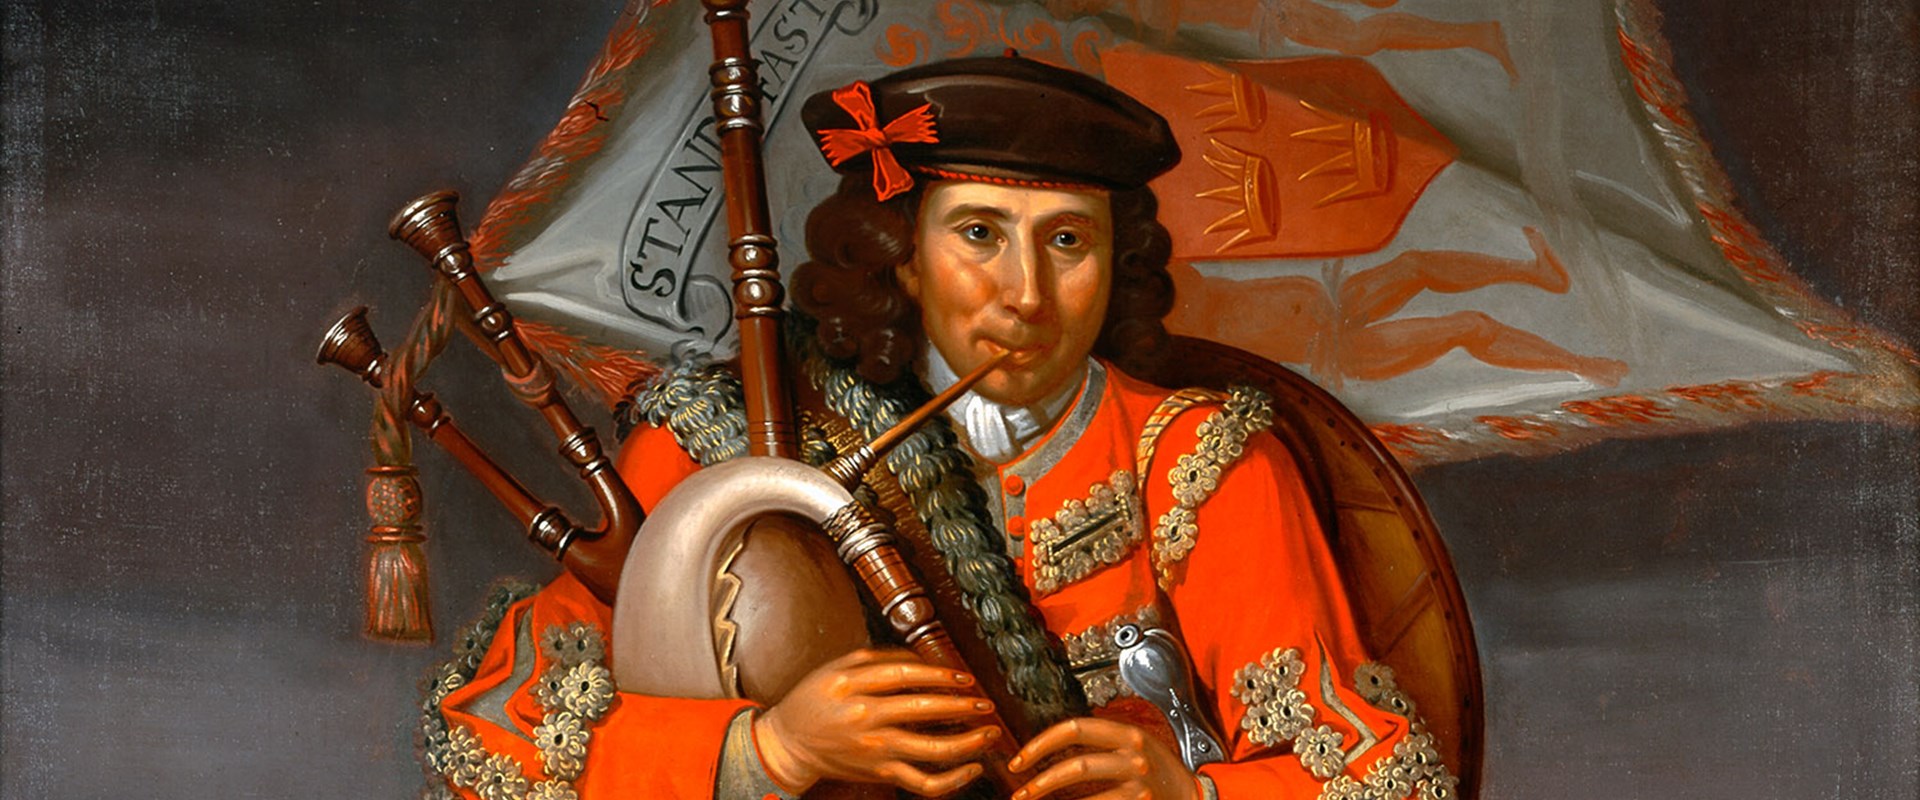 Painting of a man playing the bagpipes in the countryside. He is wearing a uniform of red tartan.